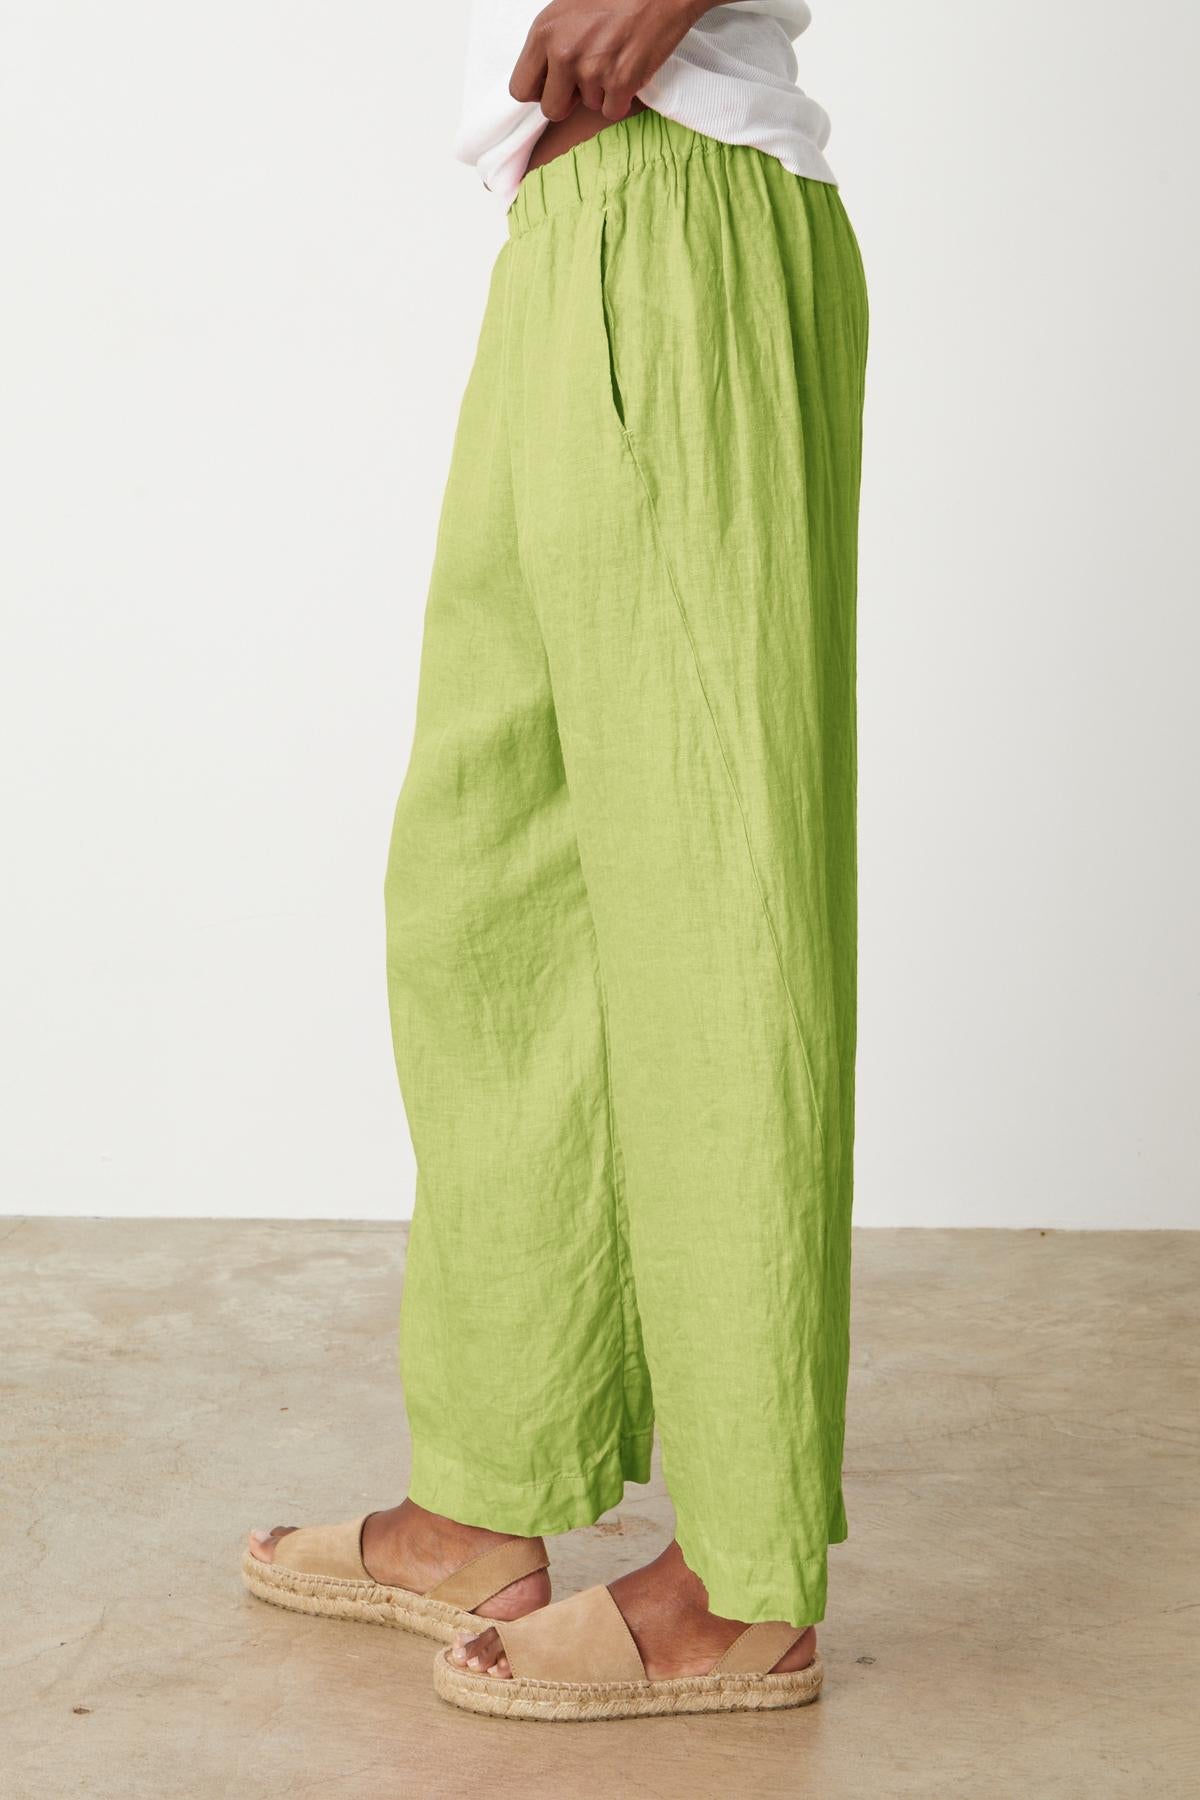 Lola pant in kiwi green colored linen side-35206341984449